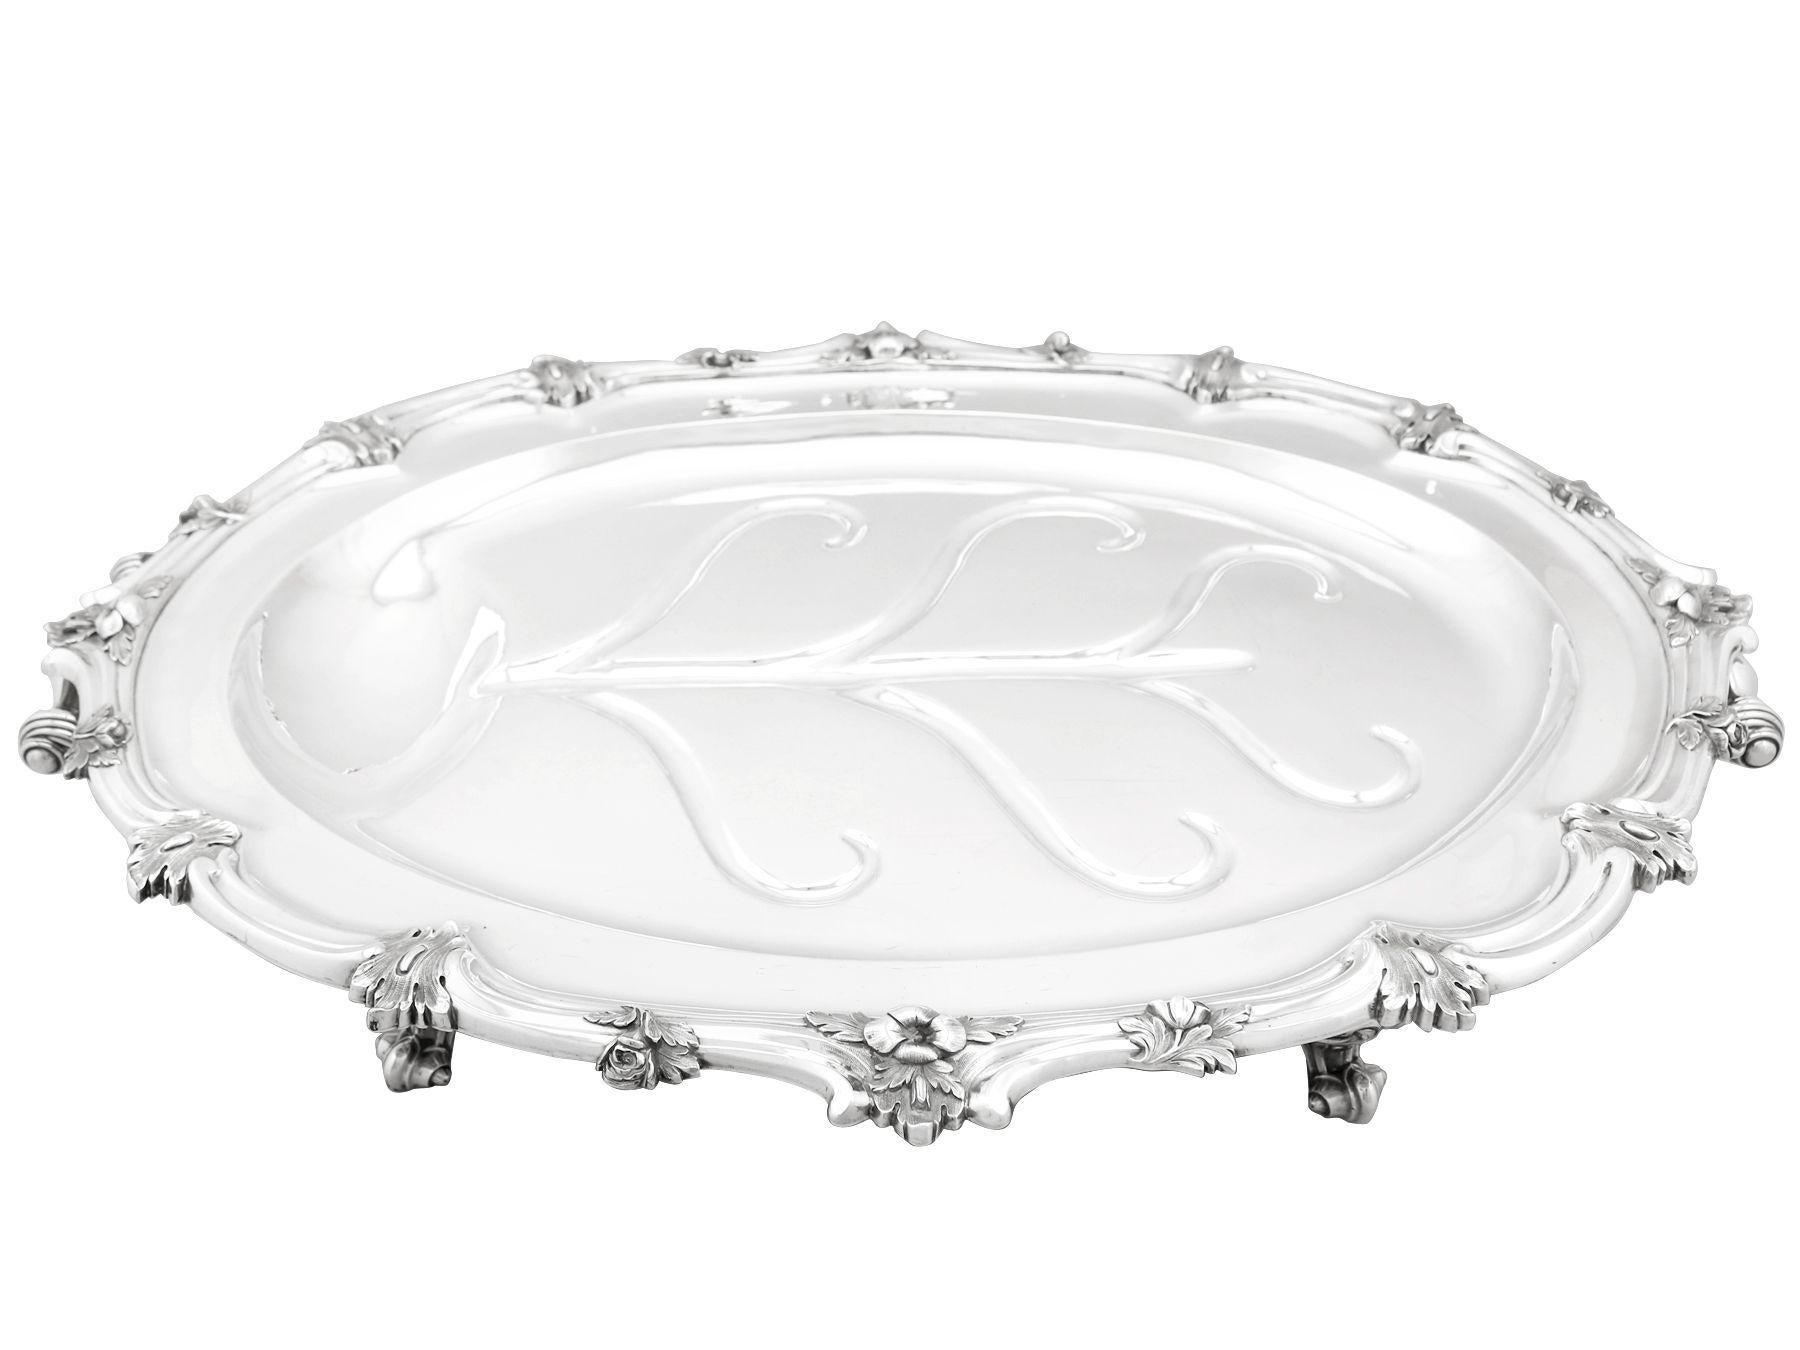 An exceptional, large and impressive antique Victorian English sterling silver and Sheffield plate venison dish; an addition to our silver dining collection

This exceptional antique Victorian sterling silver and Sheffield plate venison dish has